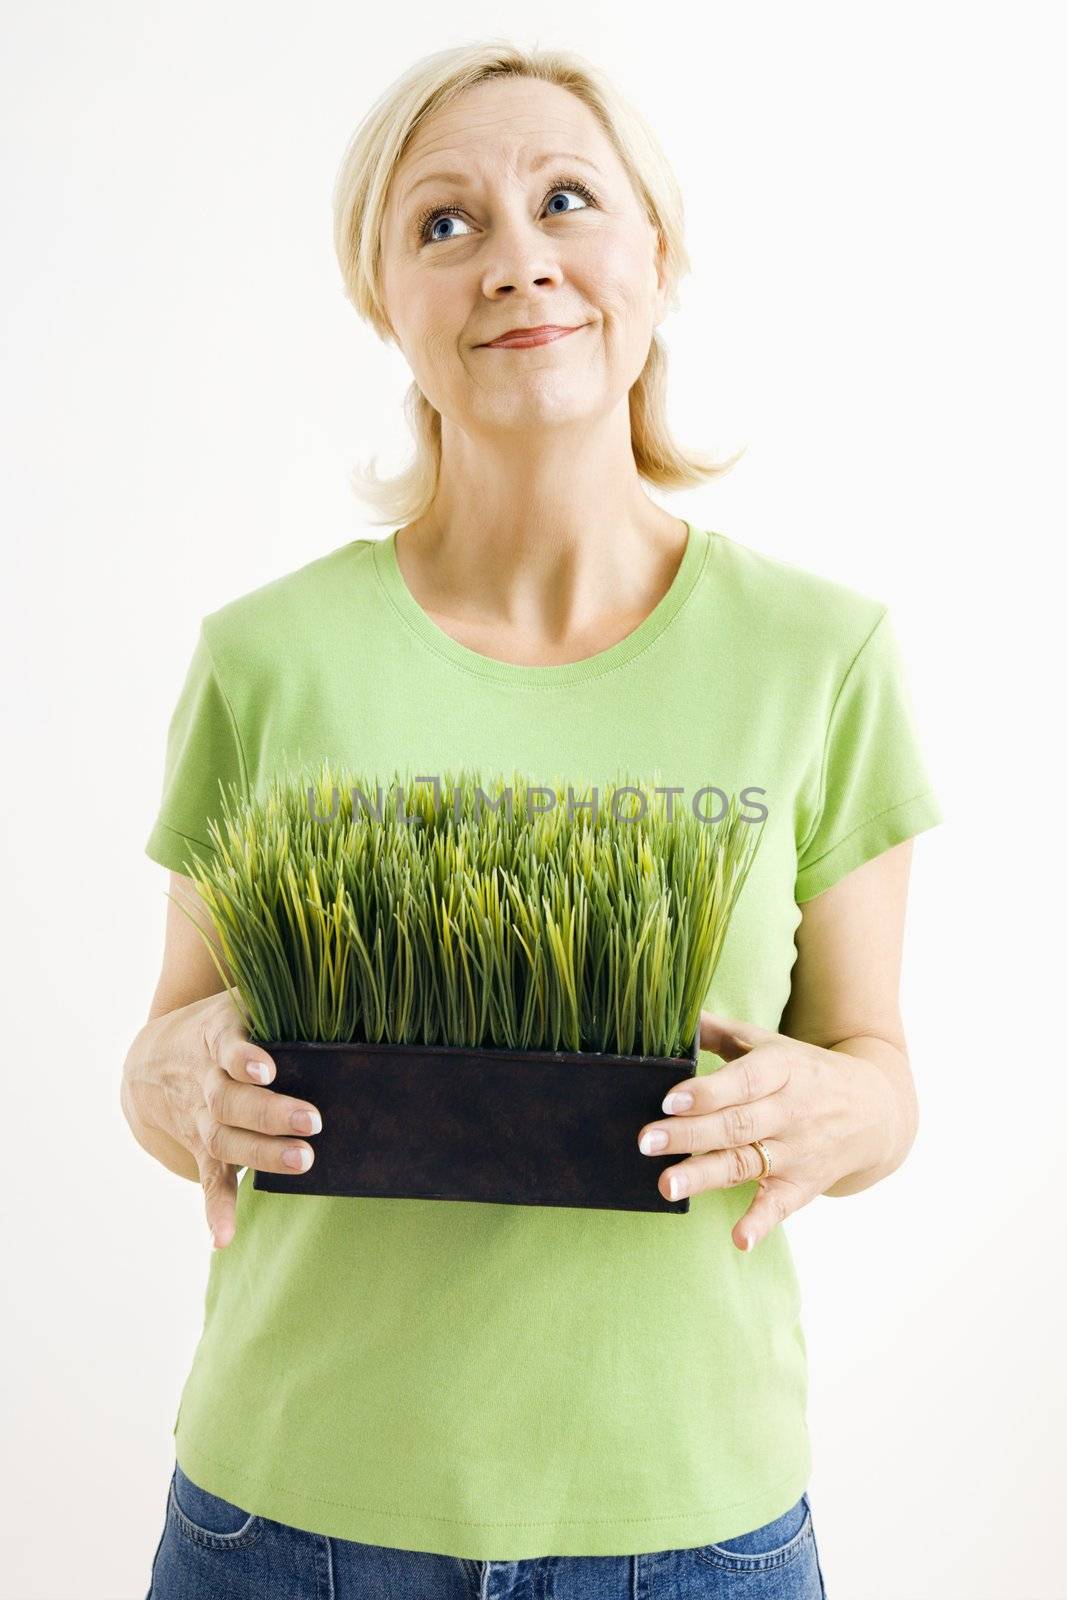 Woman holding potted grass. by iofoto